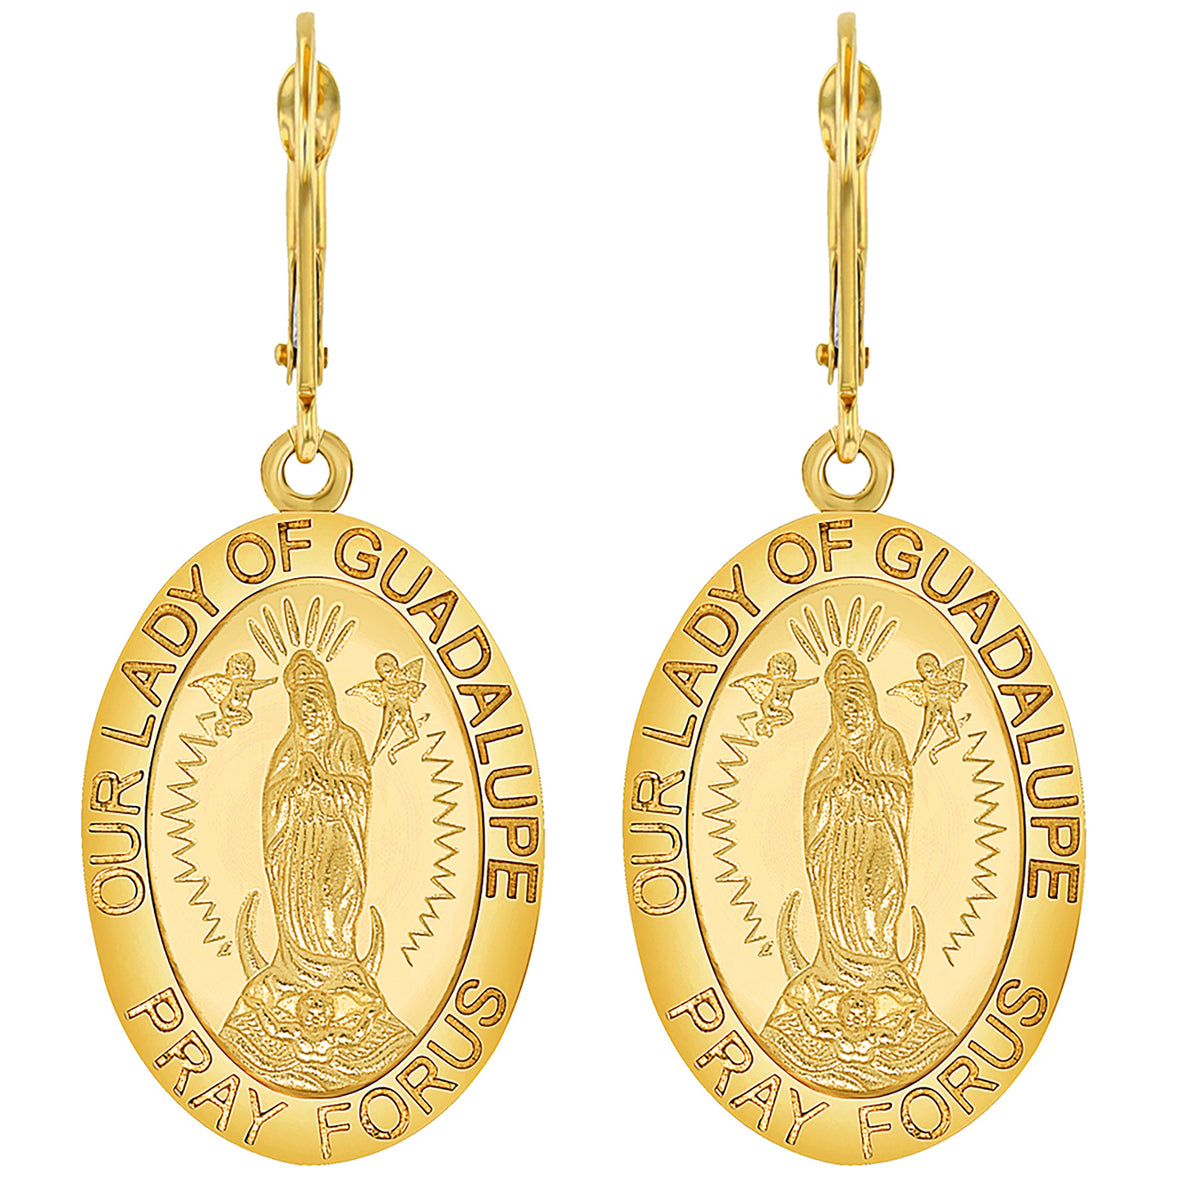 Solid 14k Yellow Gold Our Lady Of Guadalupe Medallion Dangle Drop Earrings with Leverback